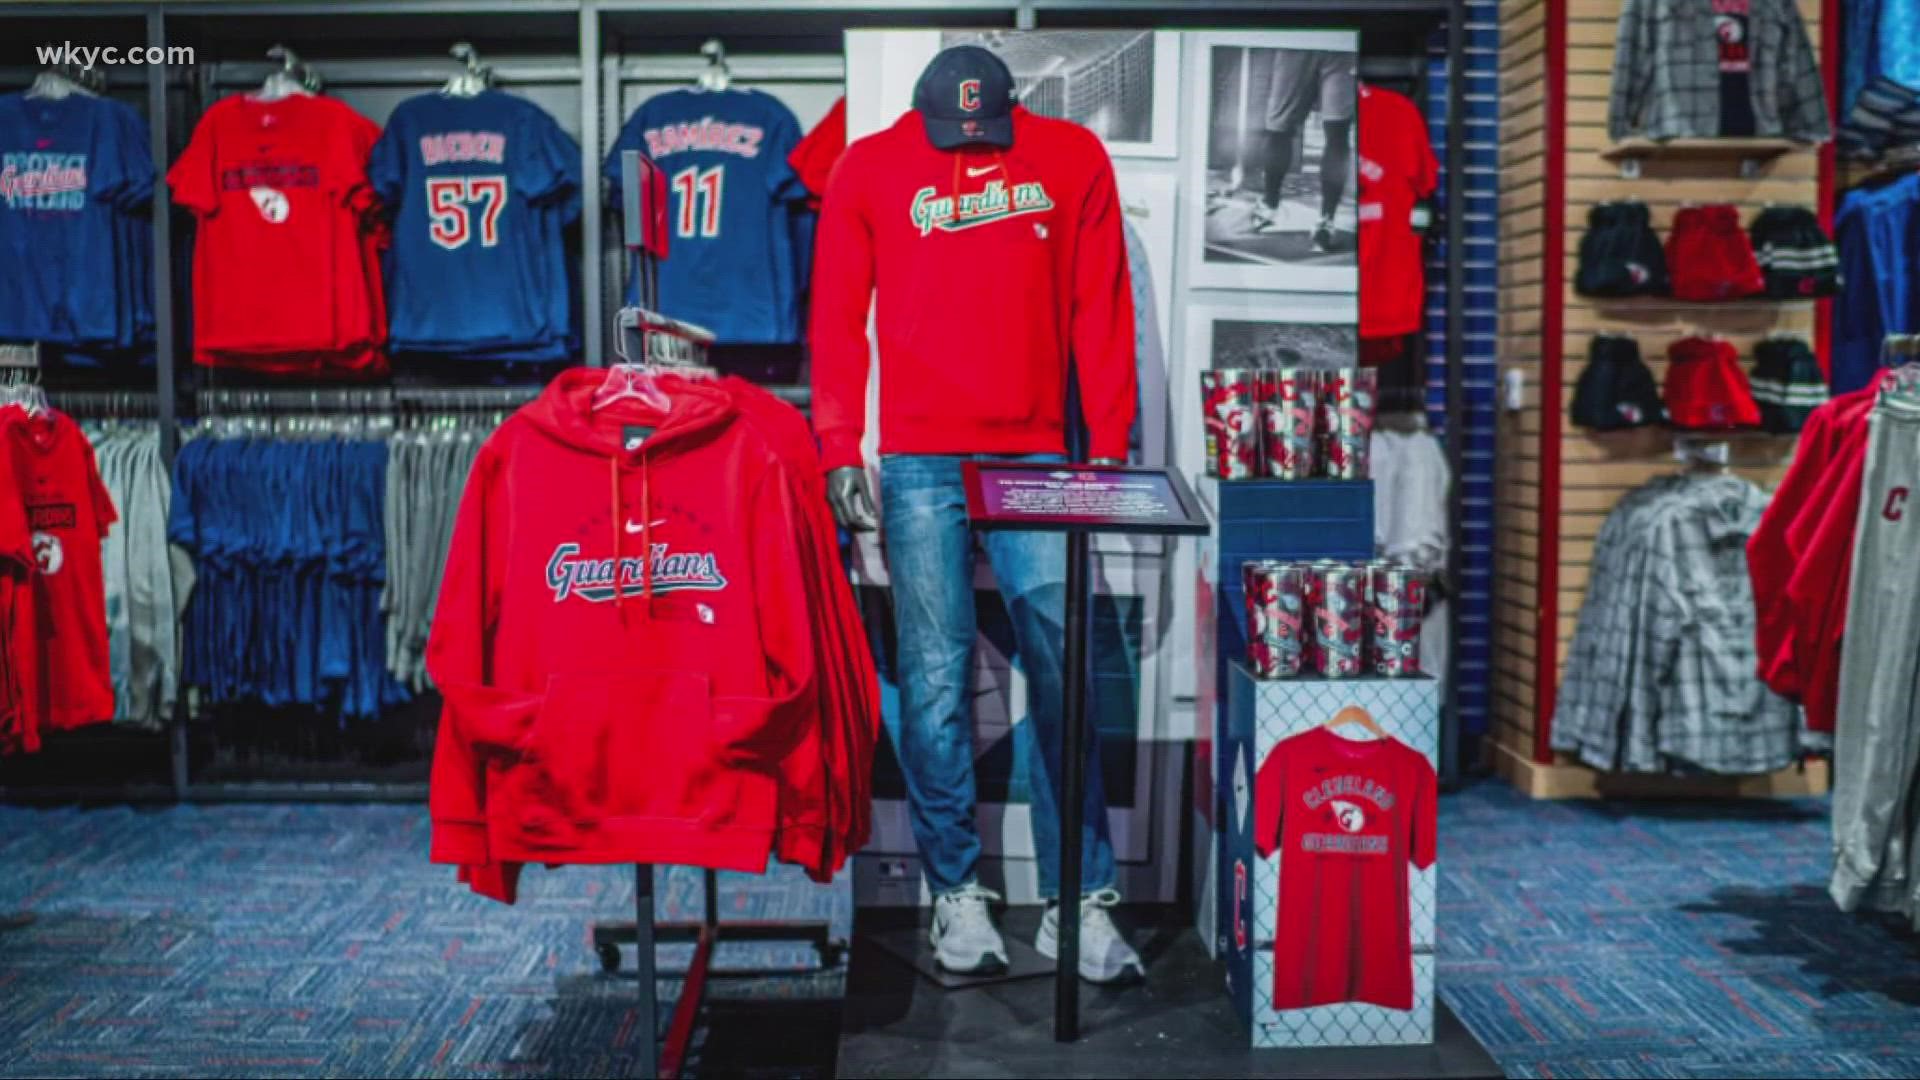 The Cleveland Guardians gave a glimpse of some of the new gear that will be available when the team store opens on Friday.